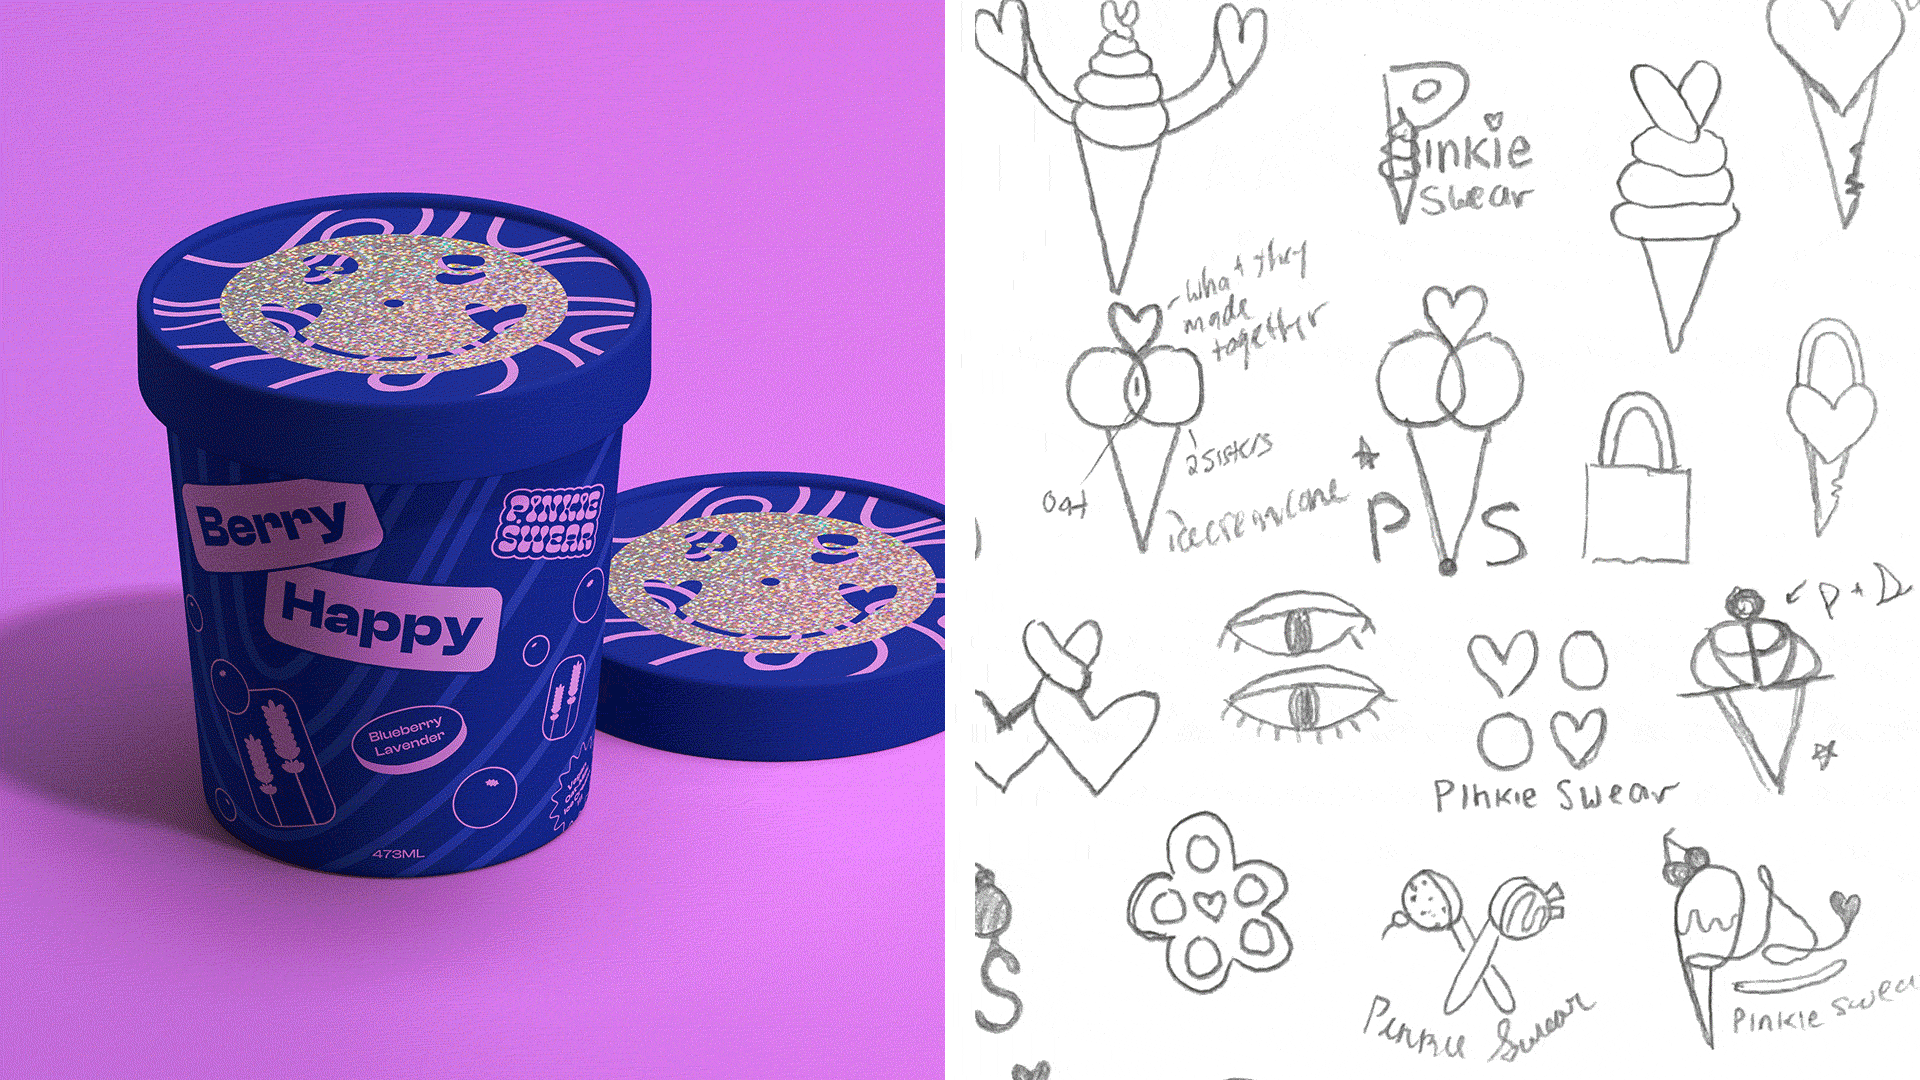 A collection of colourful ice cream tub packaging alongside logo sketches for the brand.